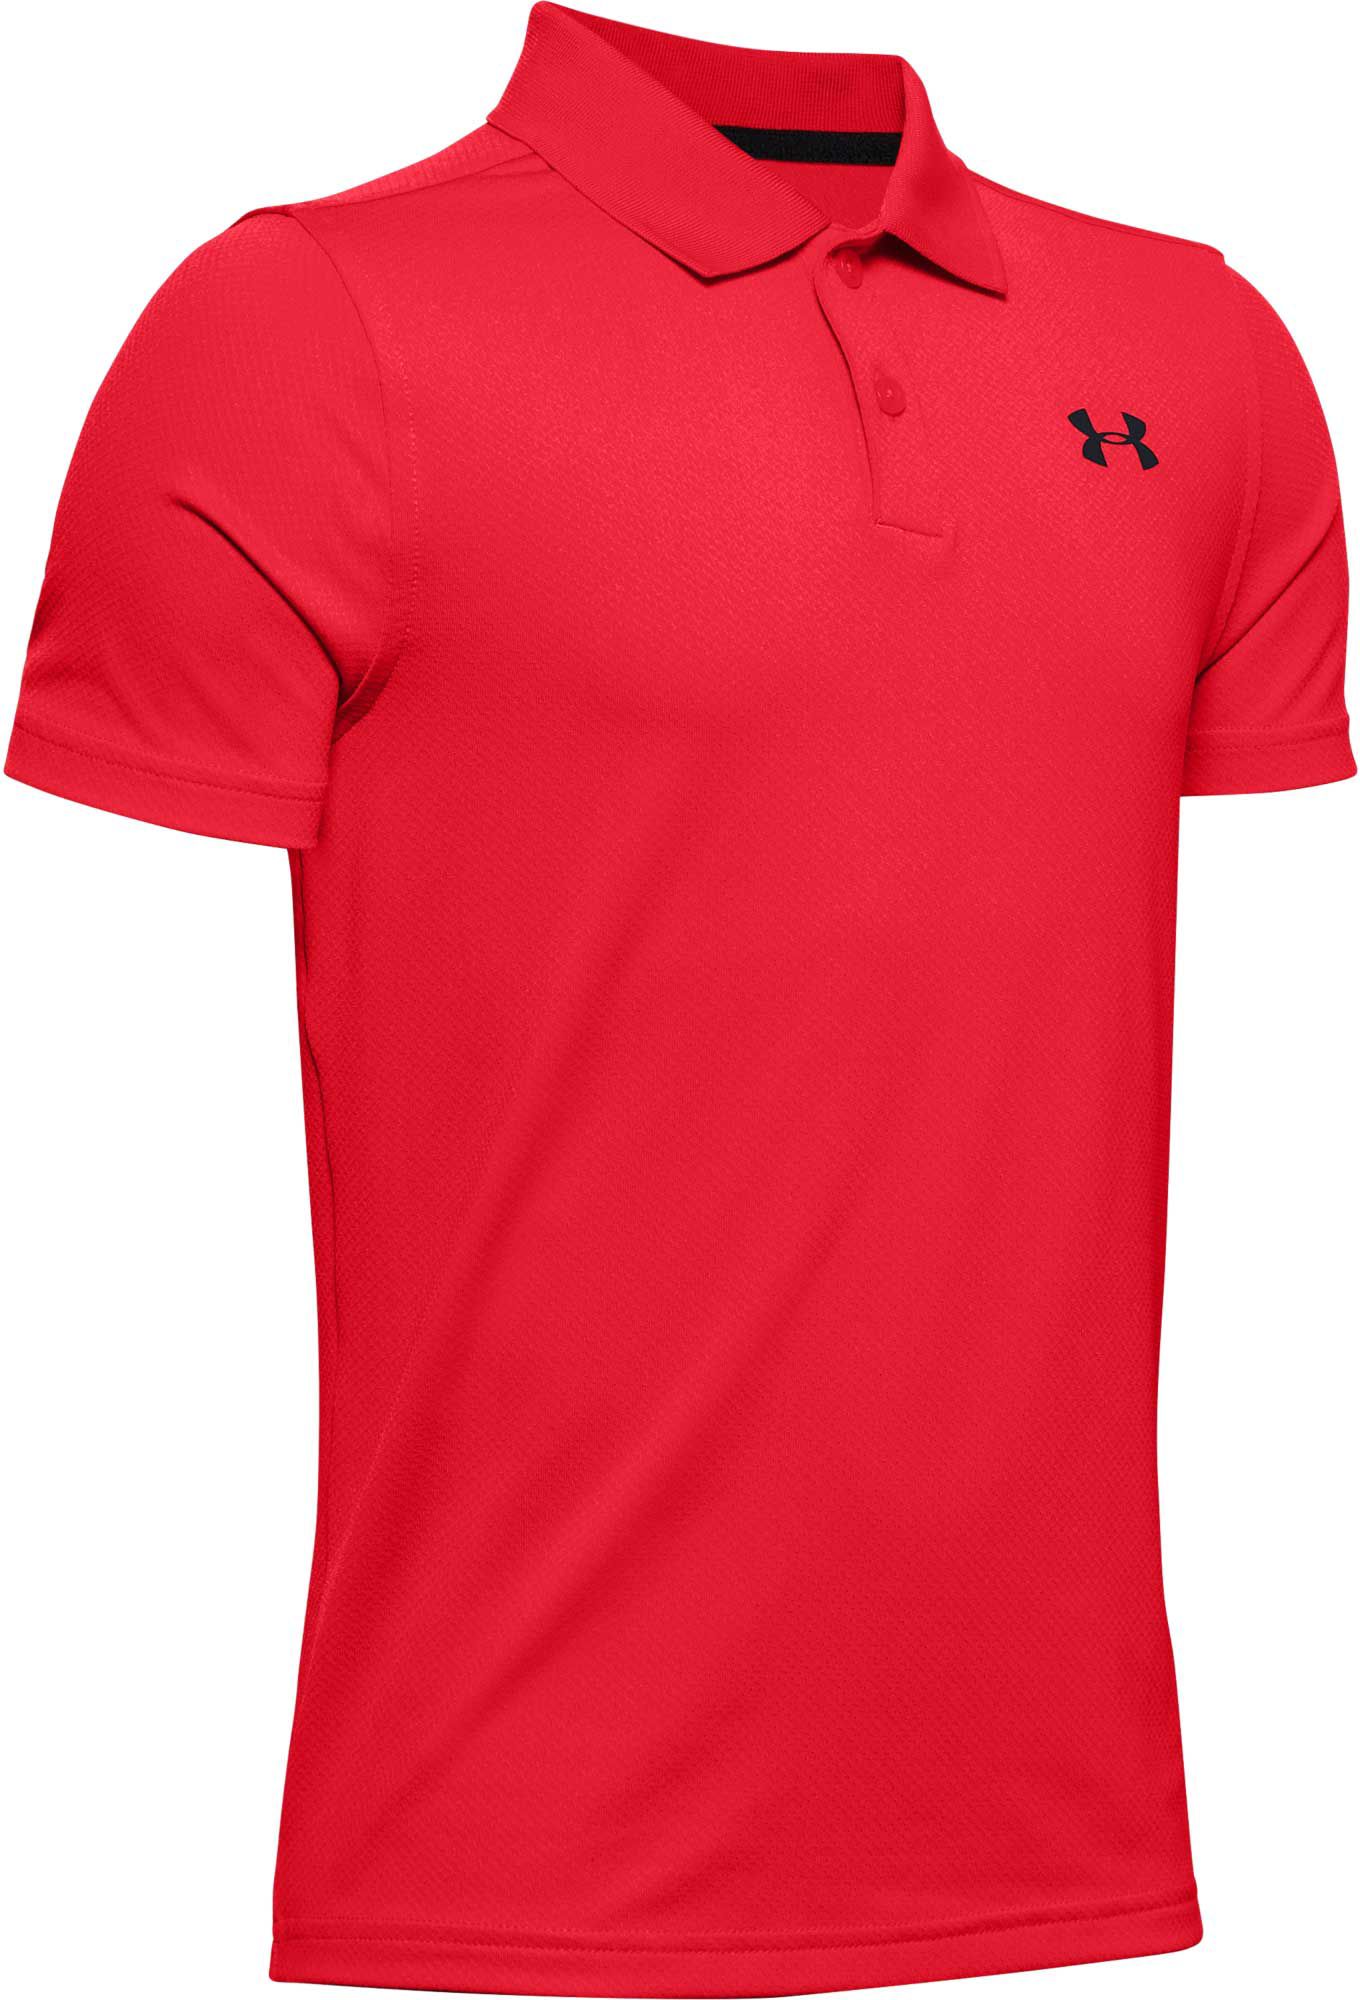 red under armour shirt womens